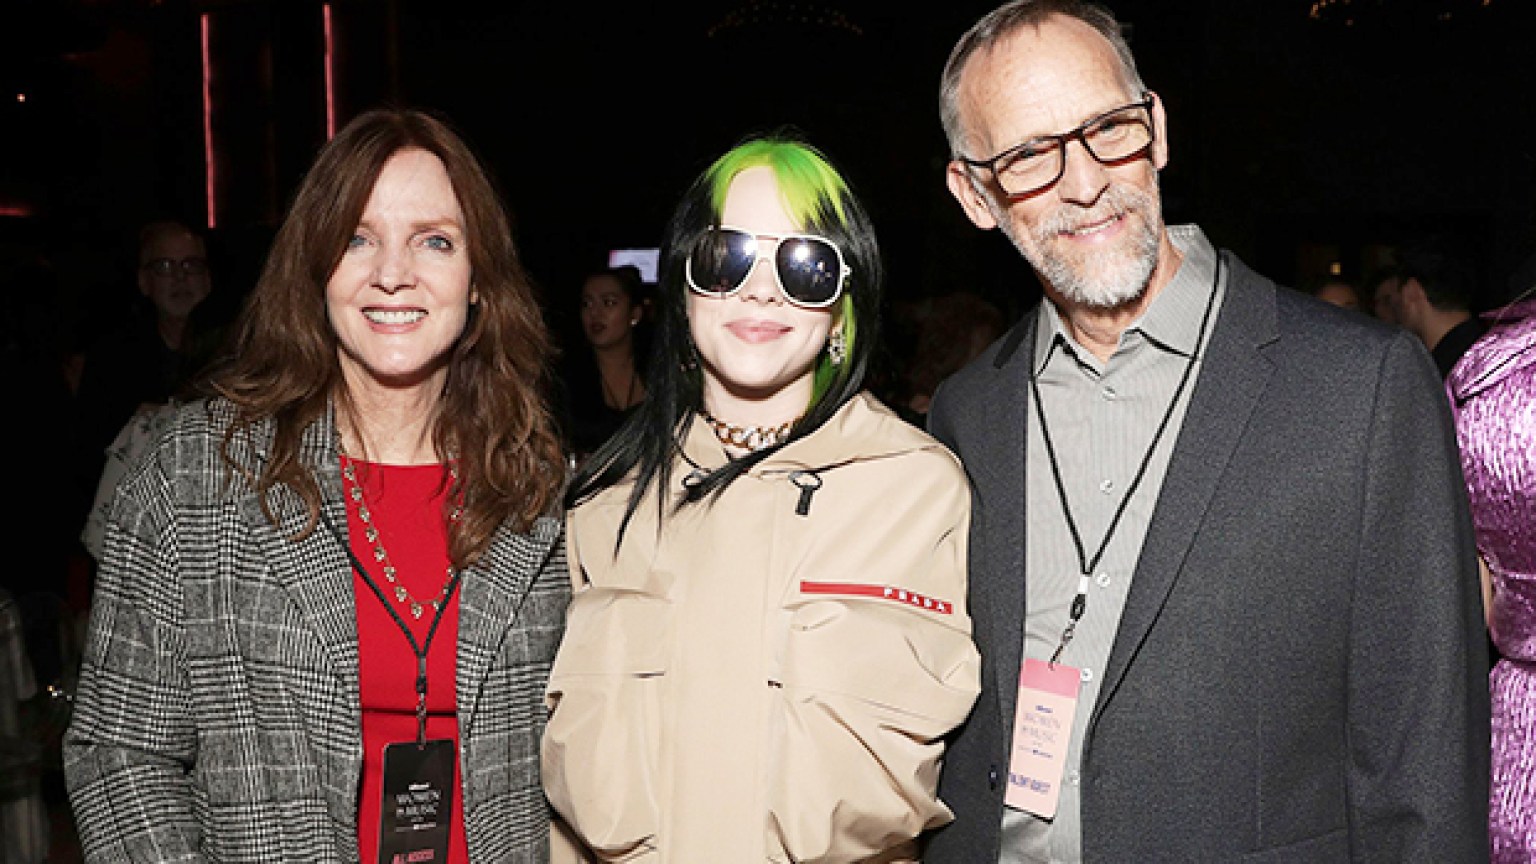 Billie Eilish’s Parents Everything To Know About Her Mom & Dad